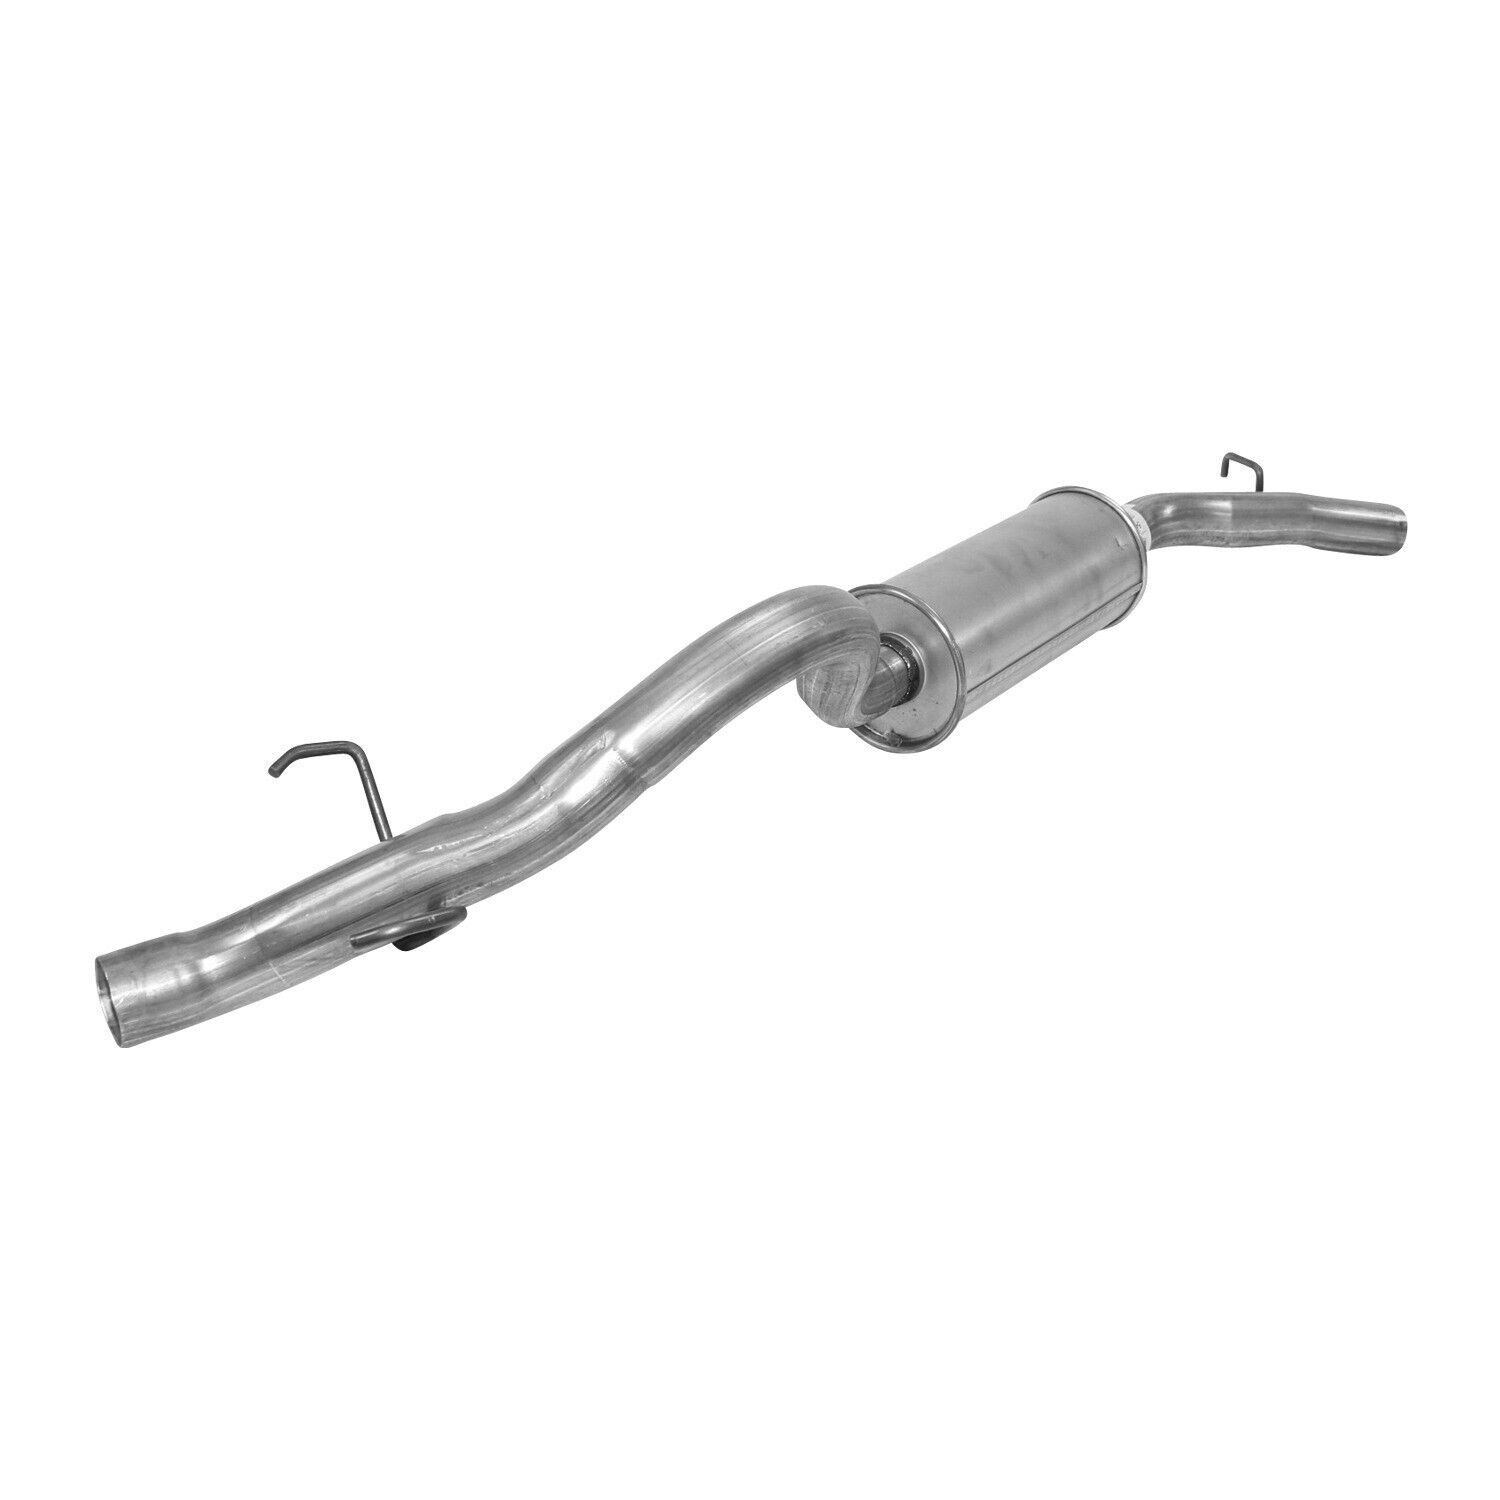 Exhaust Tail Pipe for Uplander, Montana, Terraza, Relay, Venture+More 54981